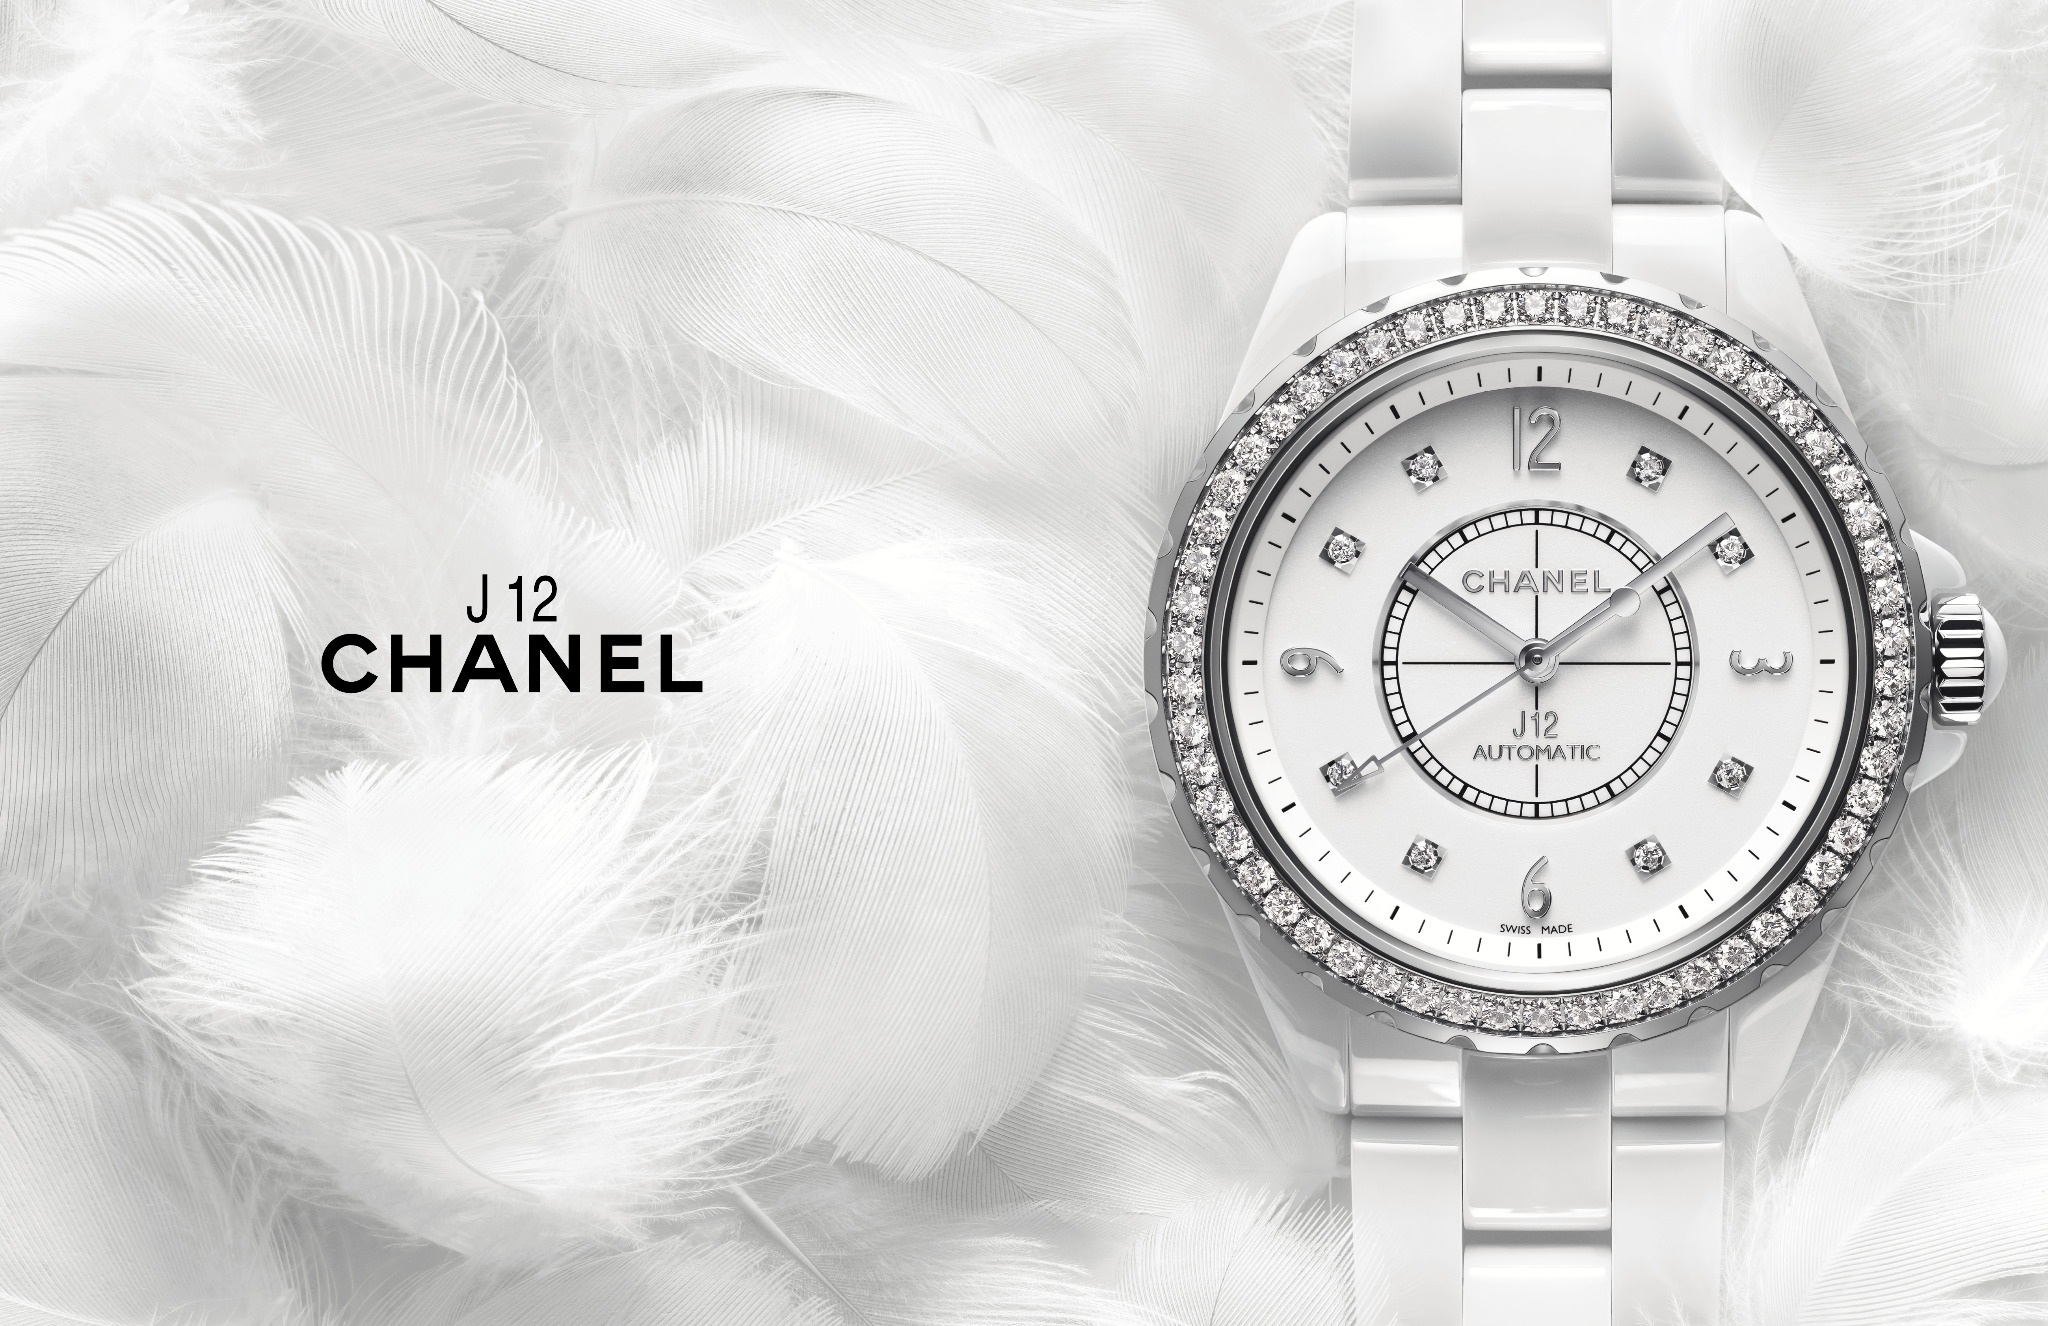 CHANEL on X: The unique shine of the CHANEL #J12 gives this